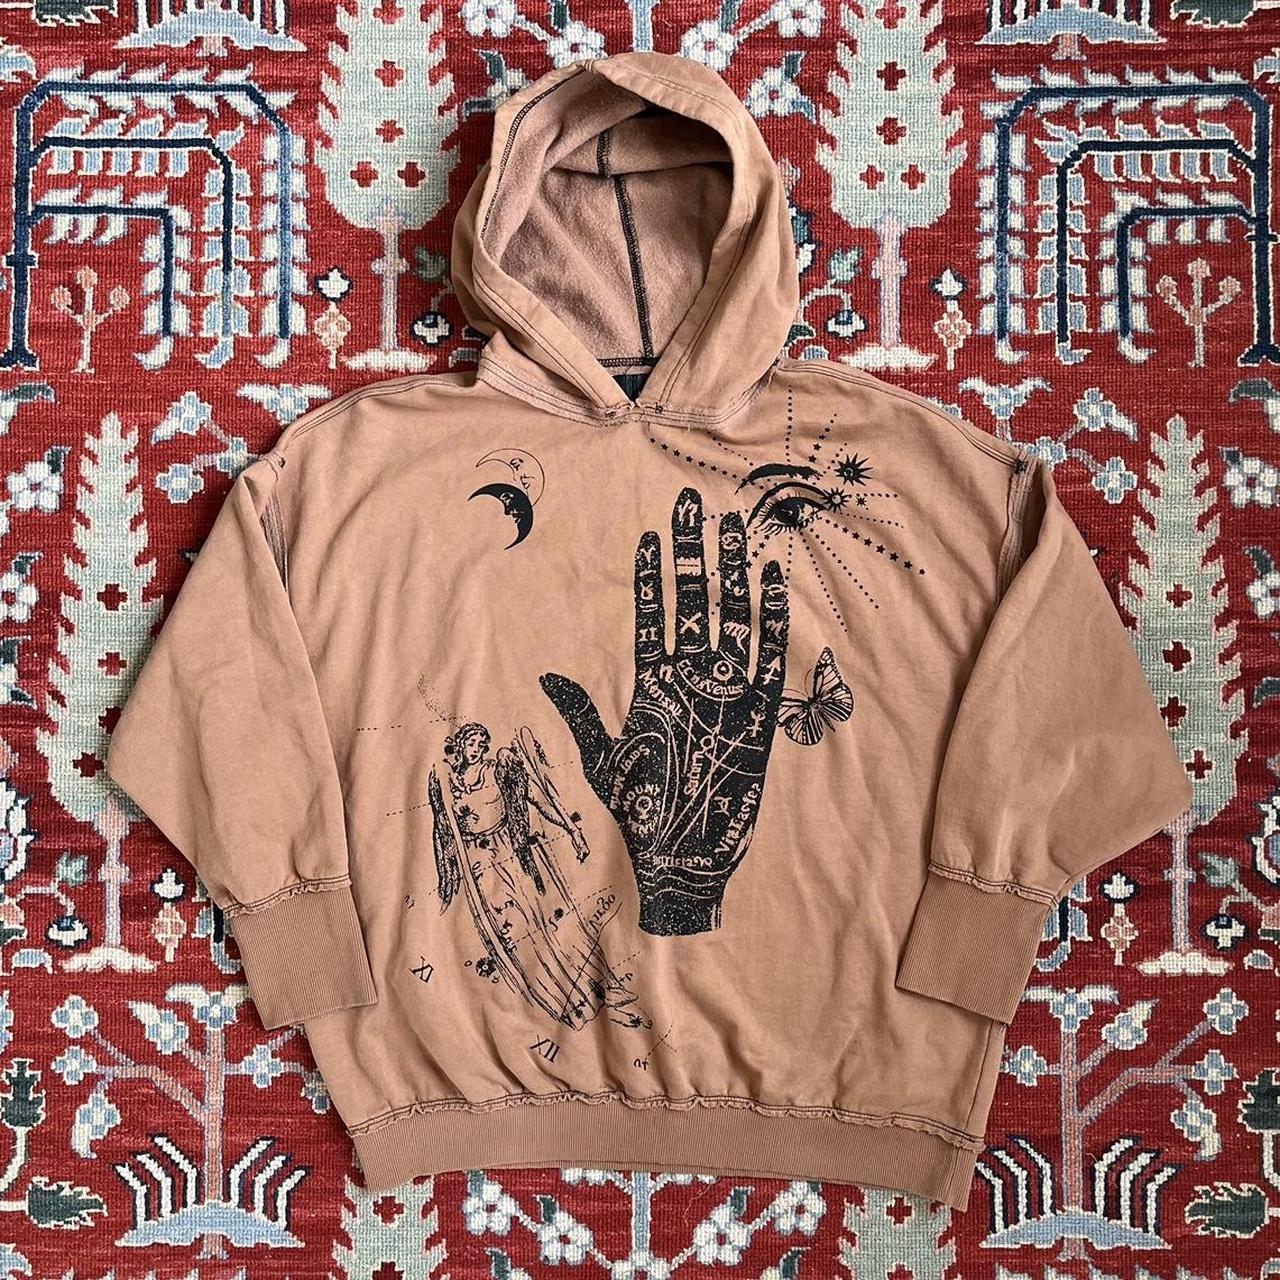 Urban Outfitters Men's Tan and Brown Hoodie